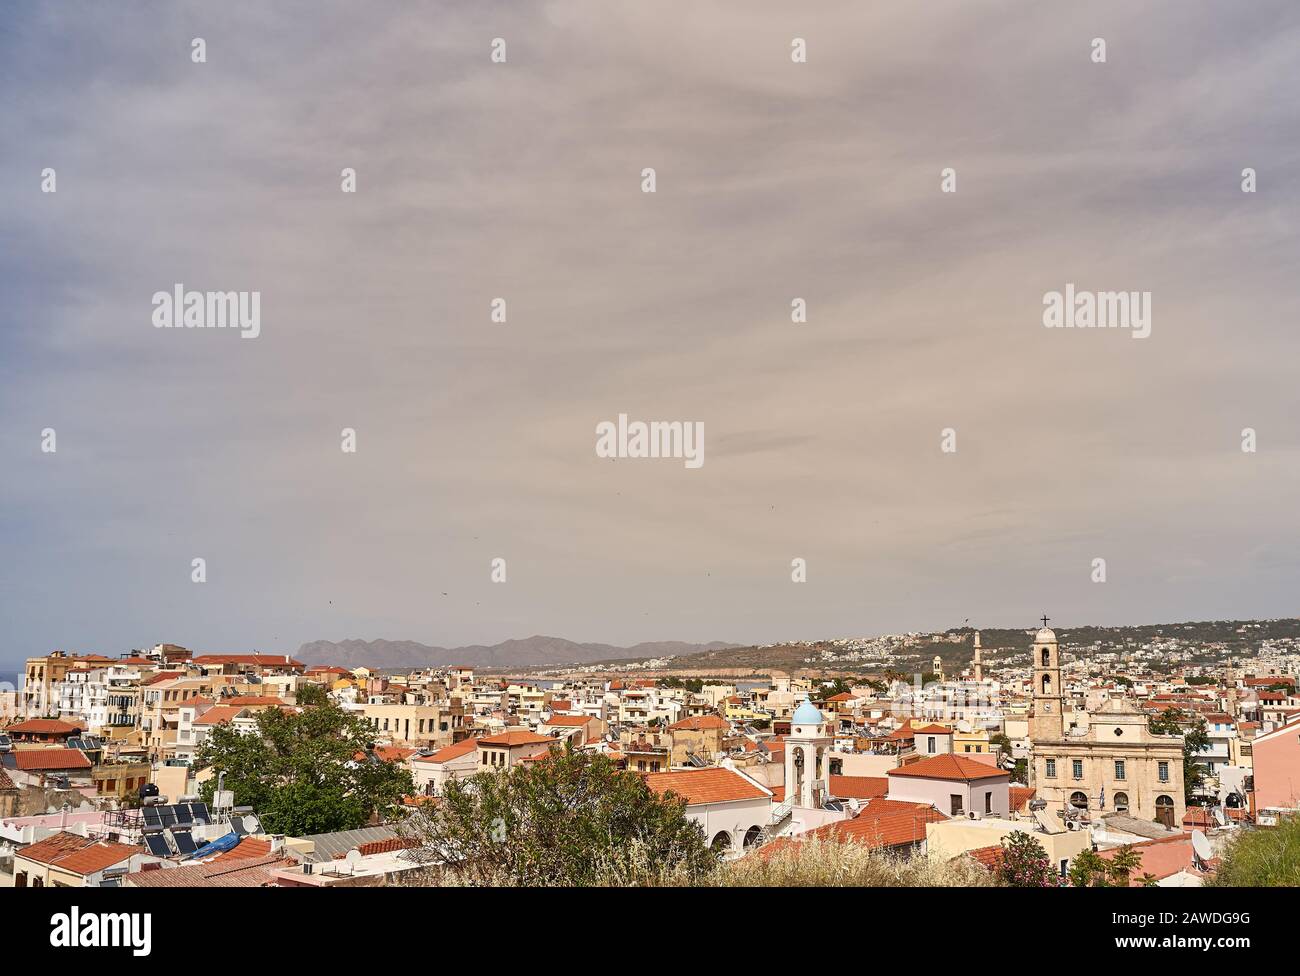 Panorama of old town of Chania, Crete, Greece in summer Stock Photo